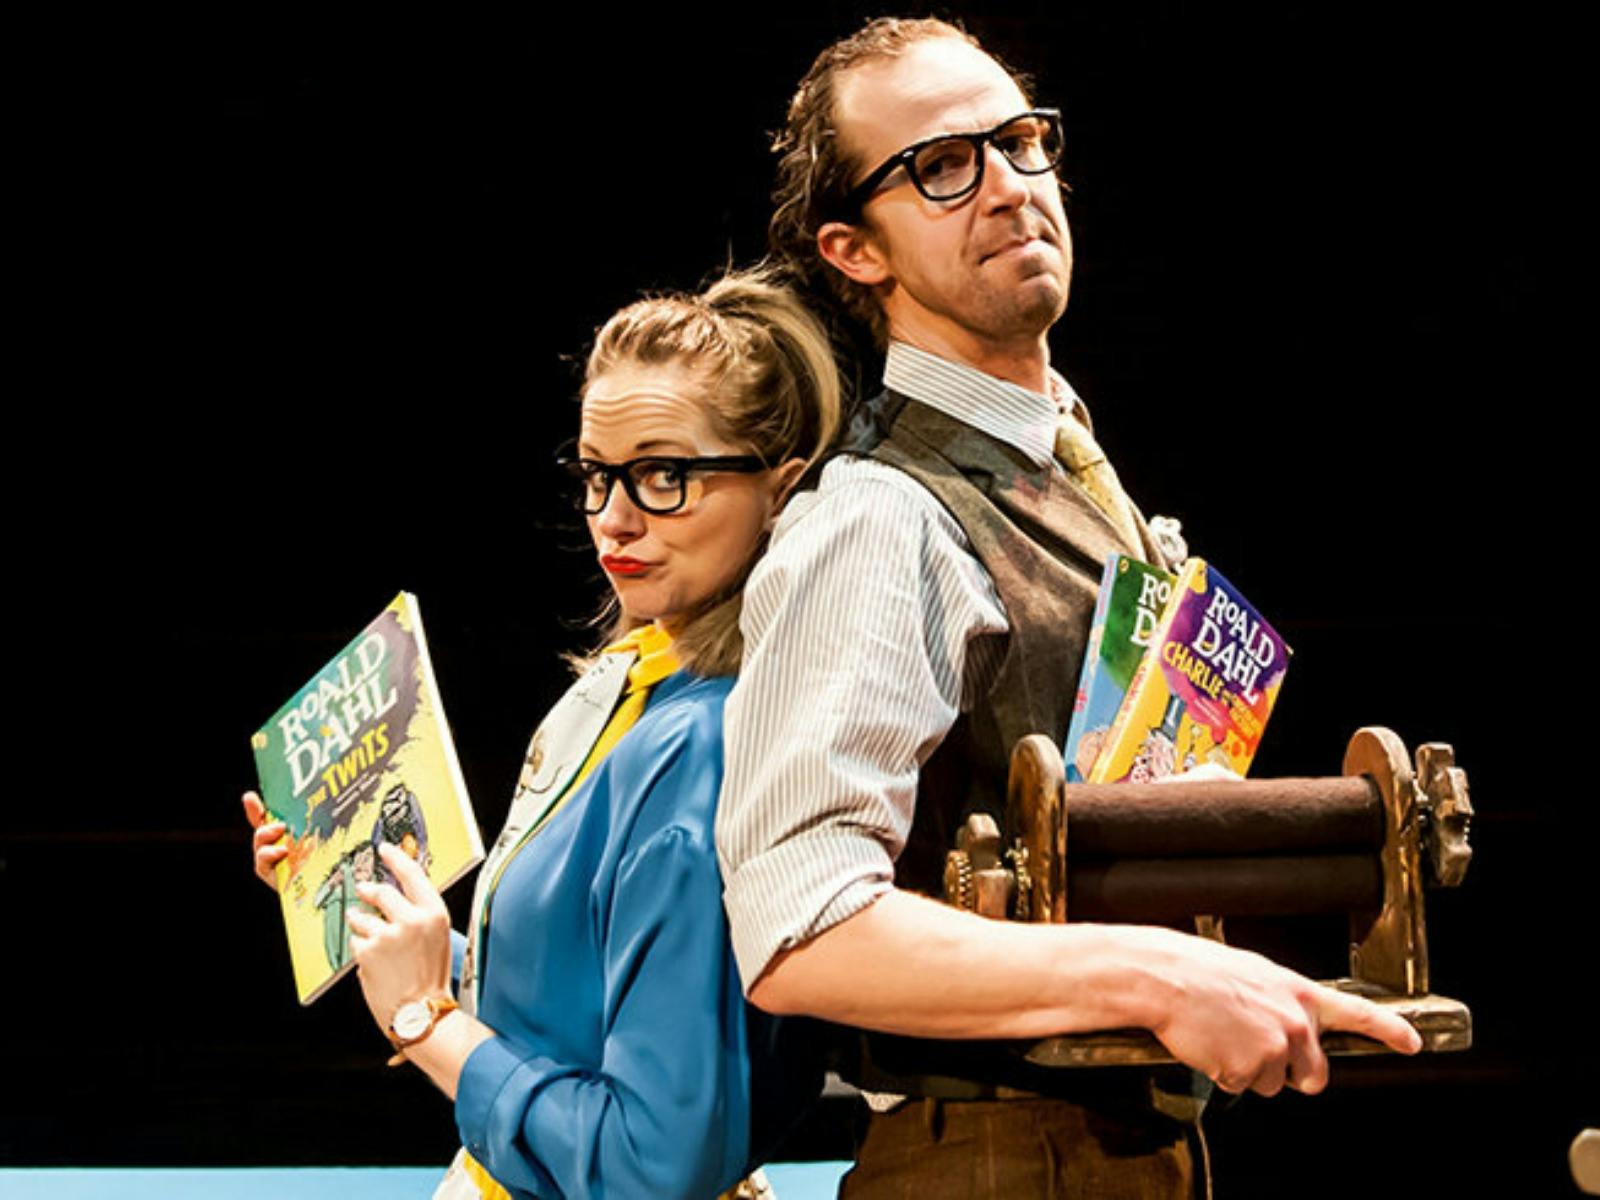 Brenda and Terrance stand back to back holding Roald Dahl Books